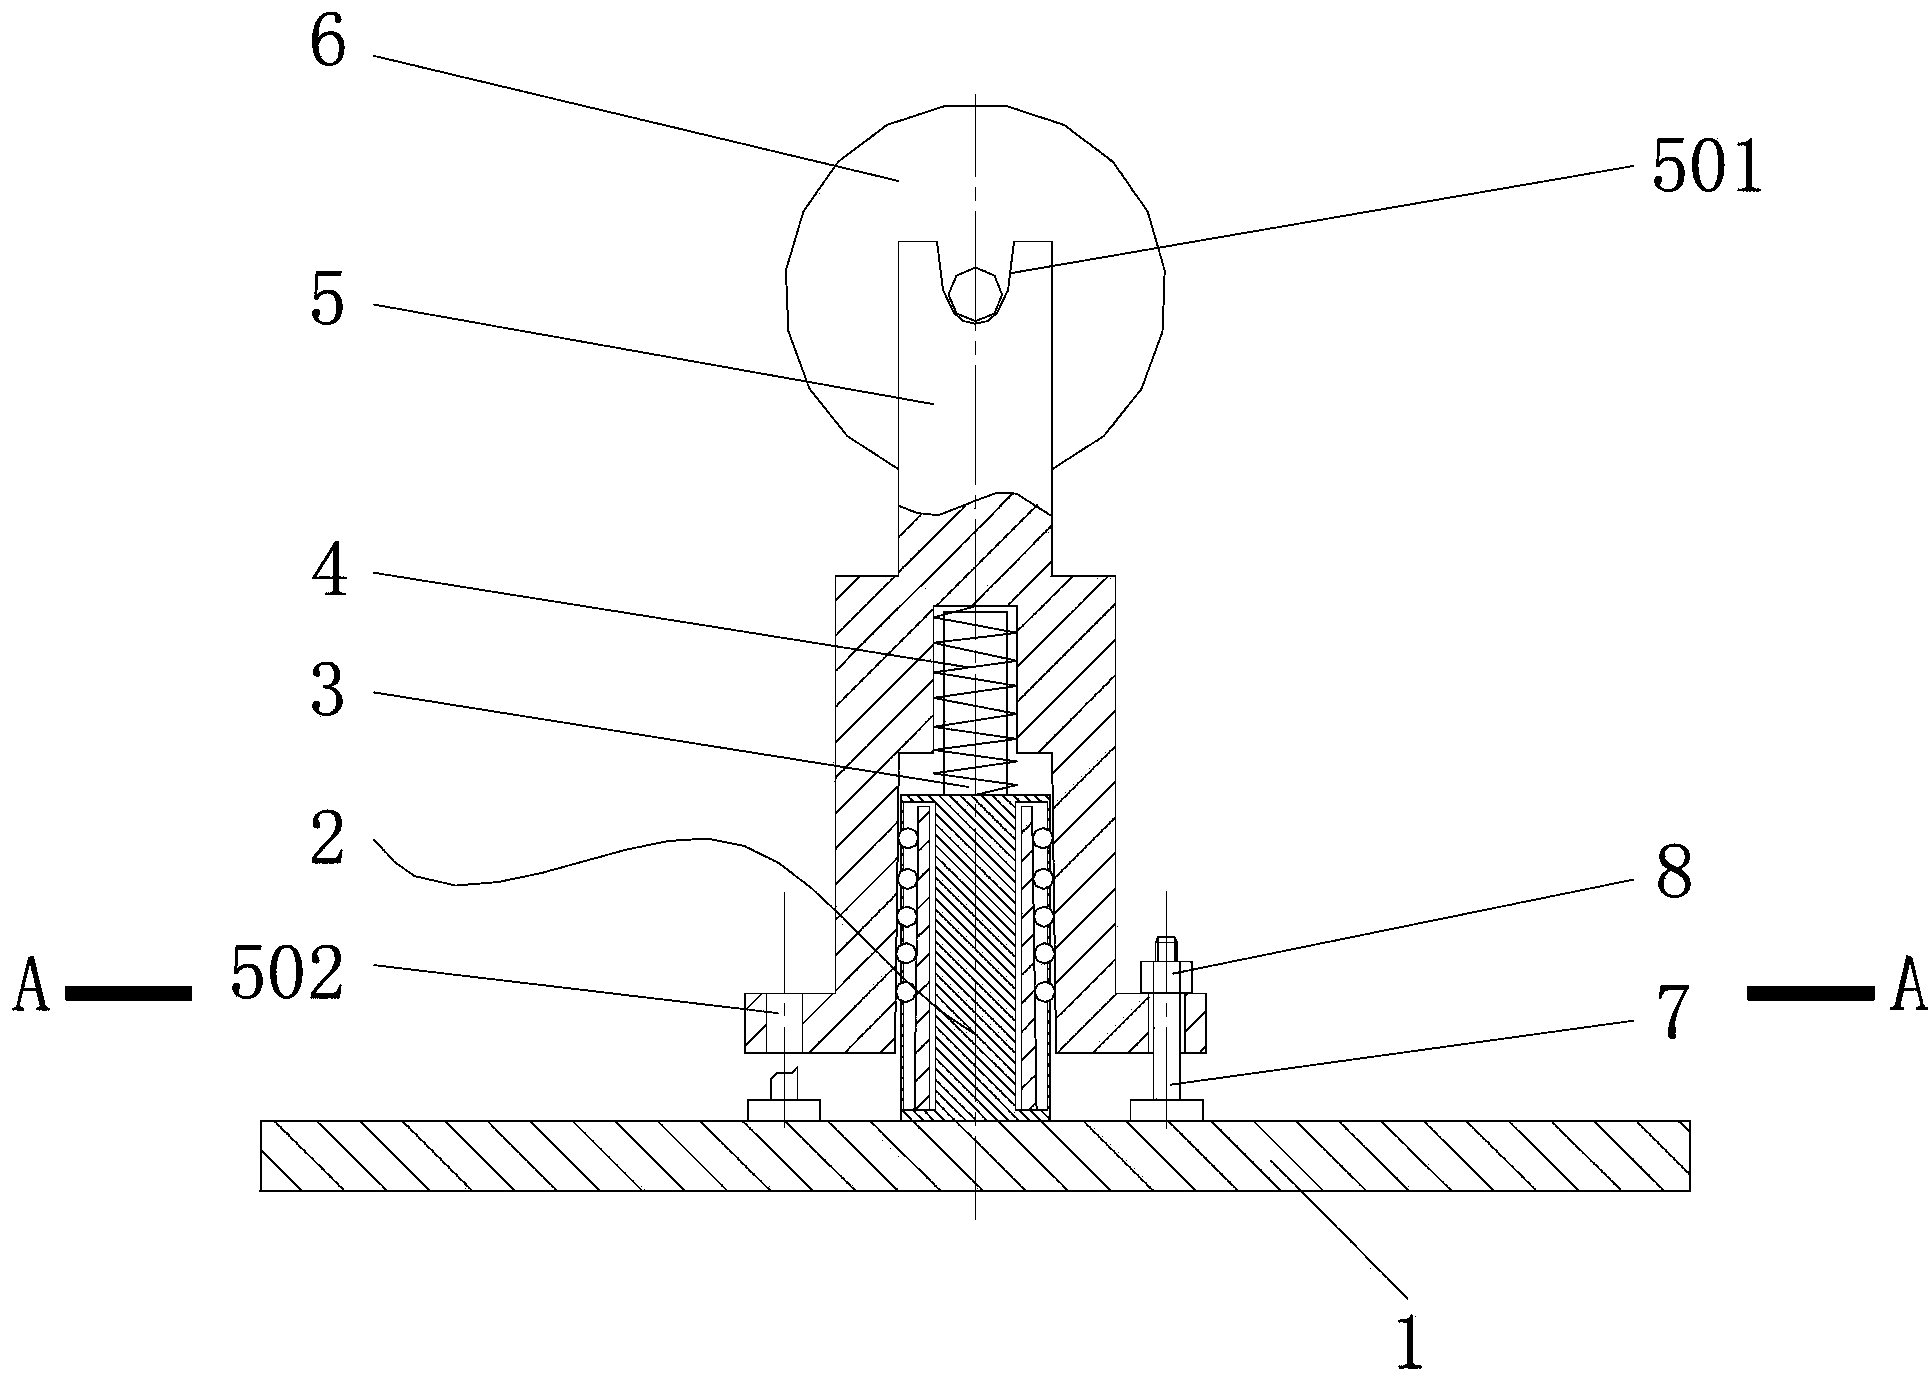 Floating water absorption device arranged on conveying belt cleaning vehicle